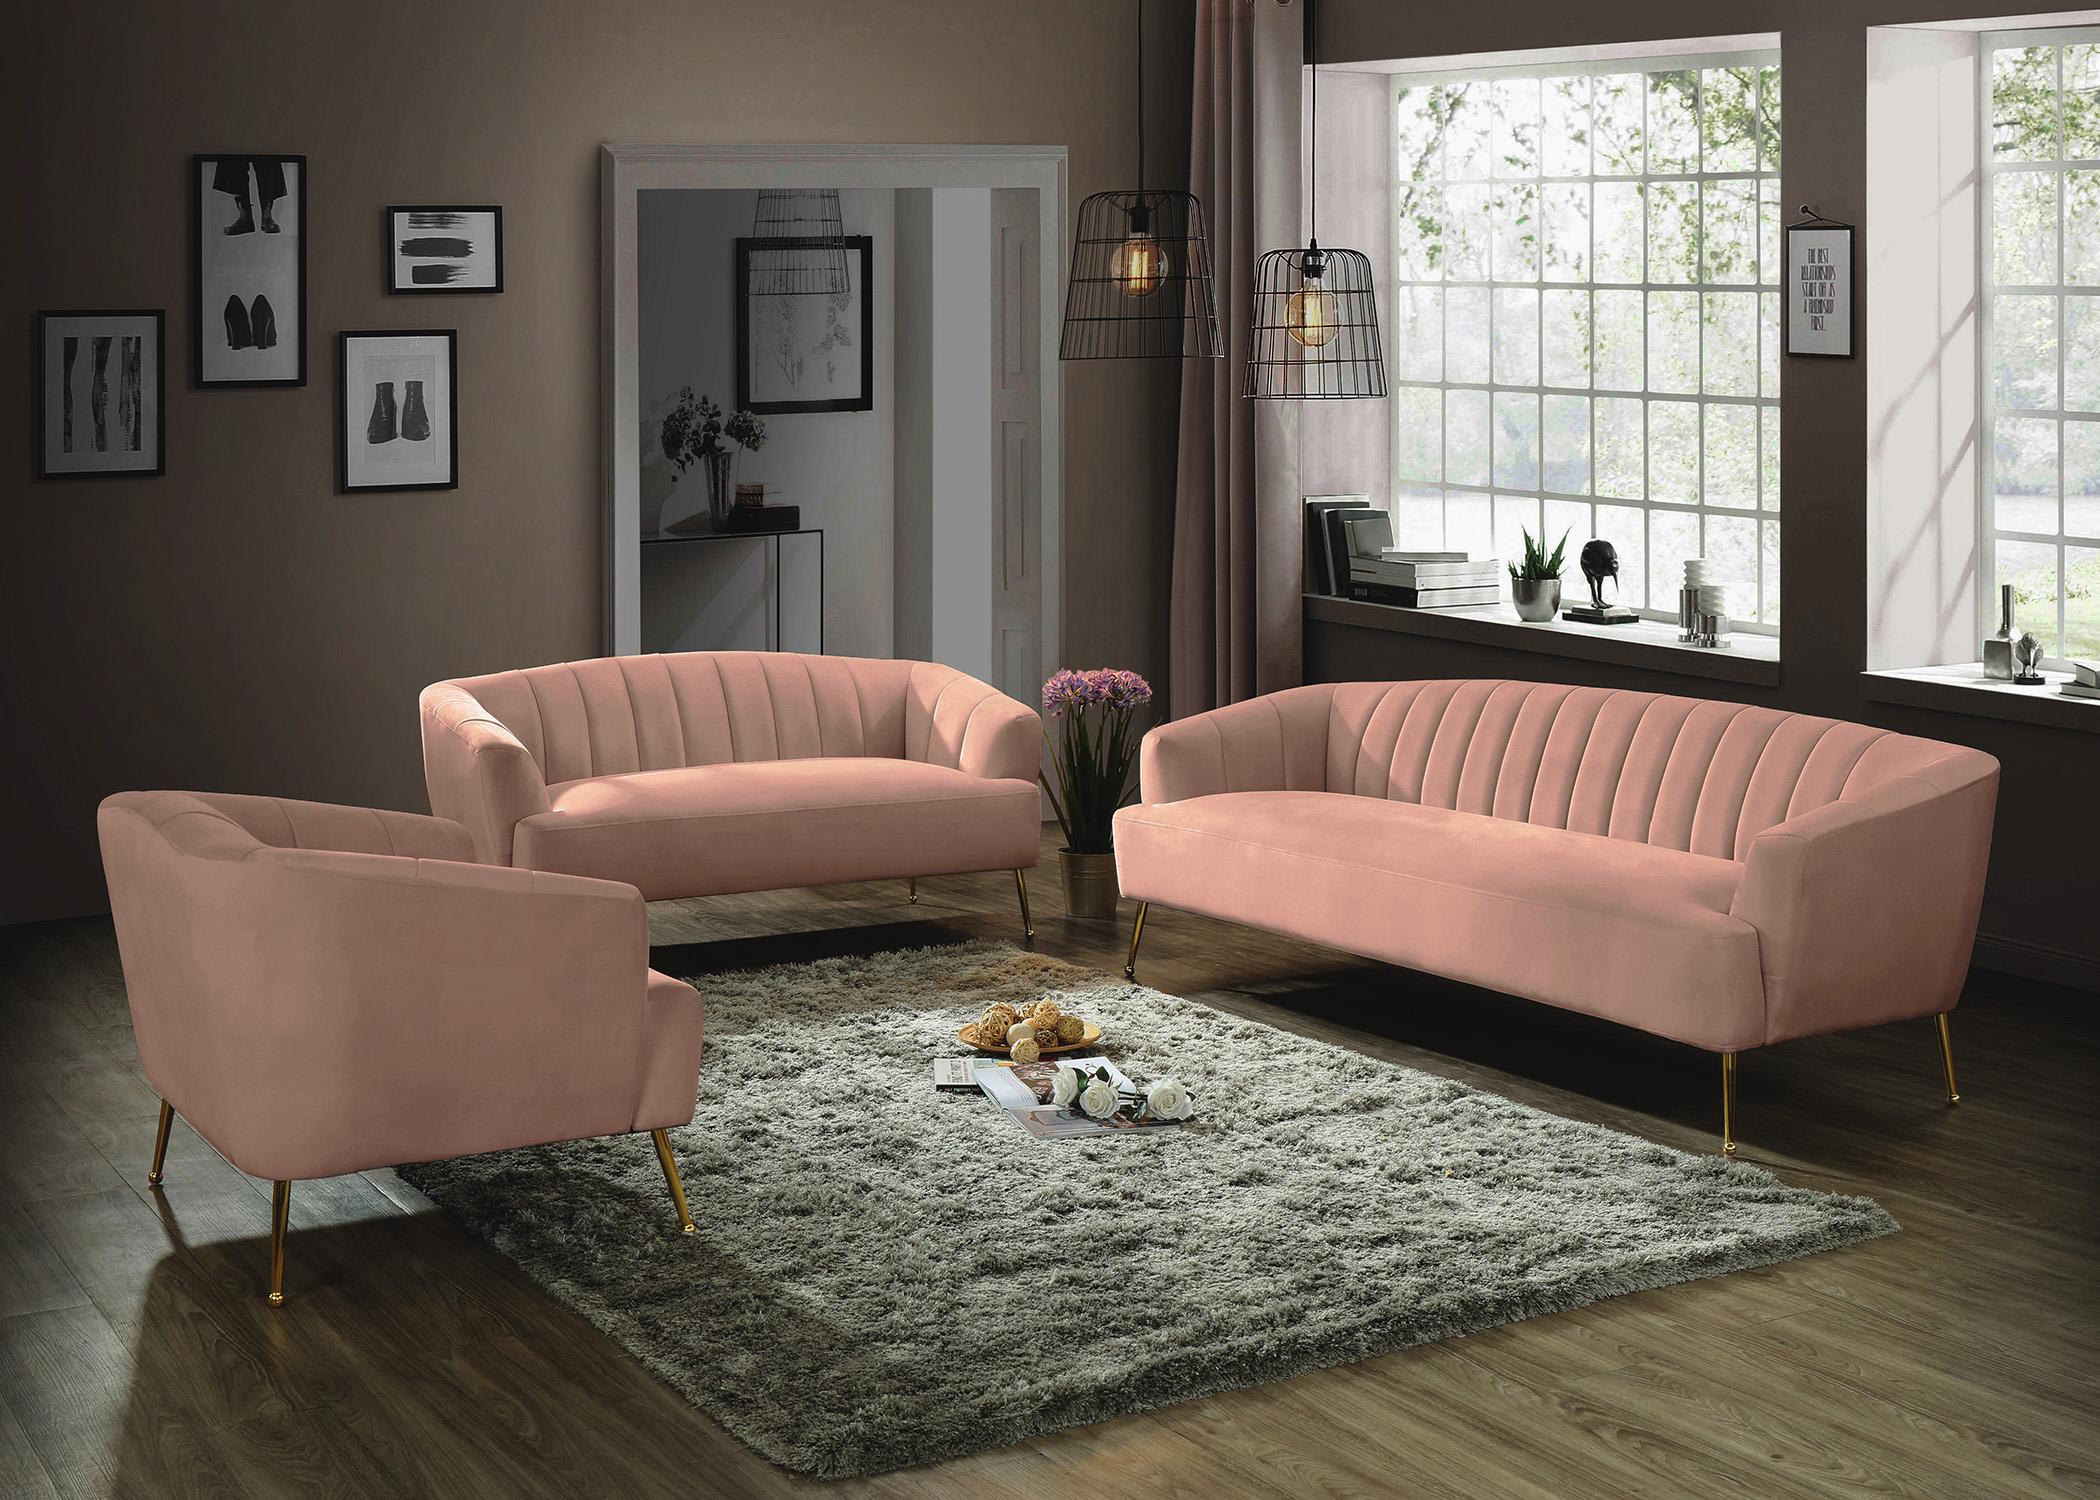 

    
657Pink-C Pink Velvet Channel Tufted Chair TORI 657Pink-C Meridian Modern Contemporary
